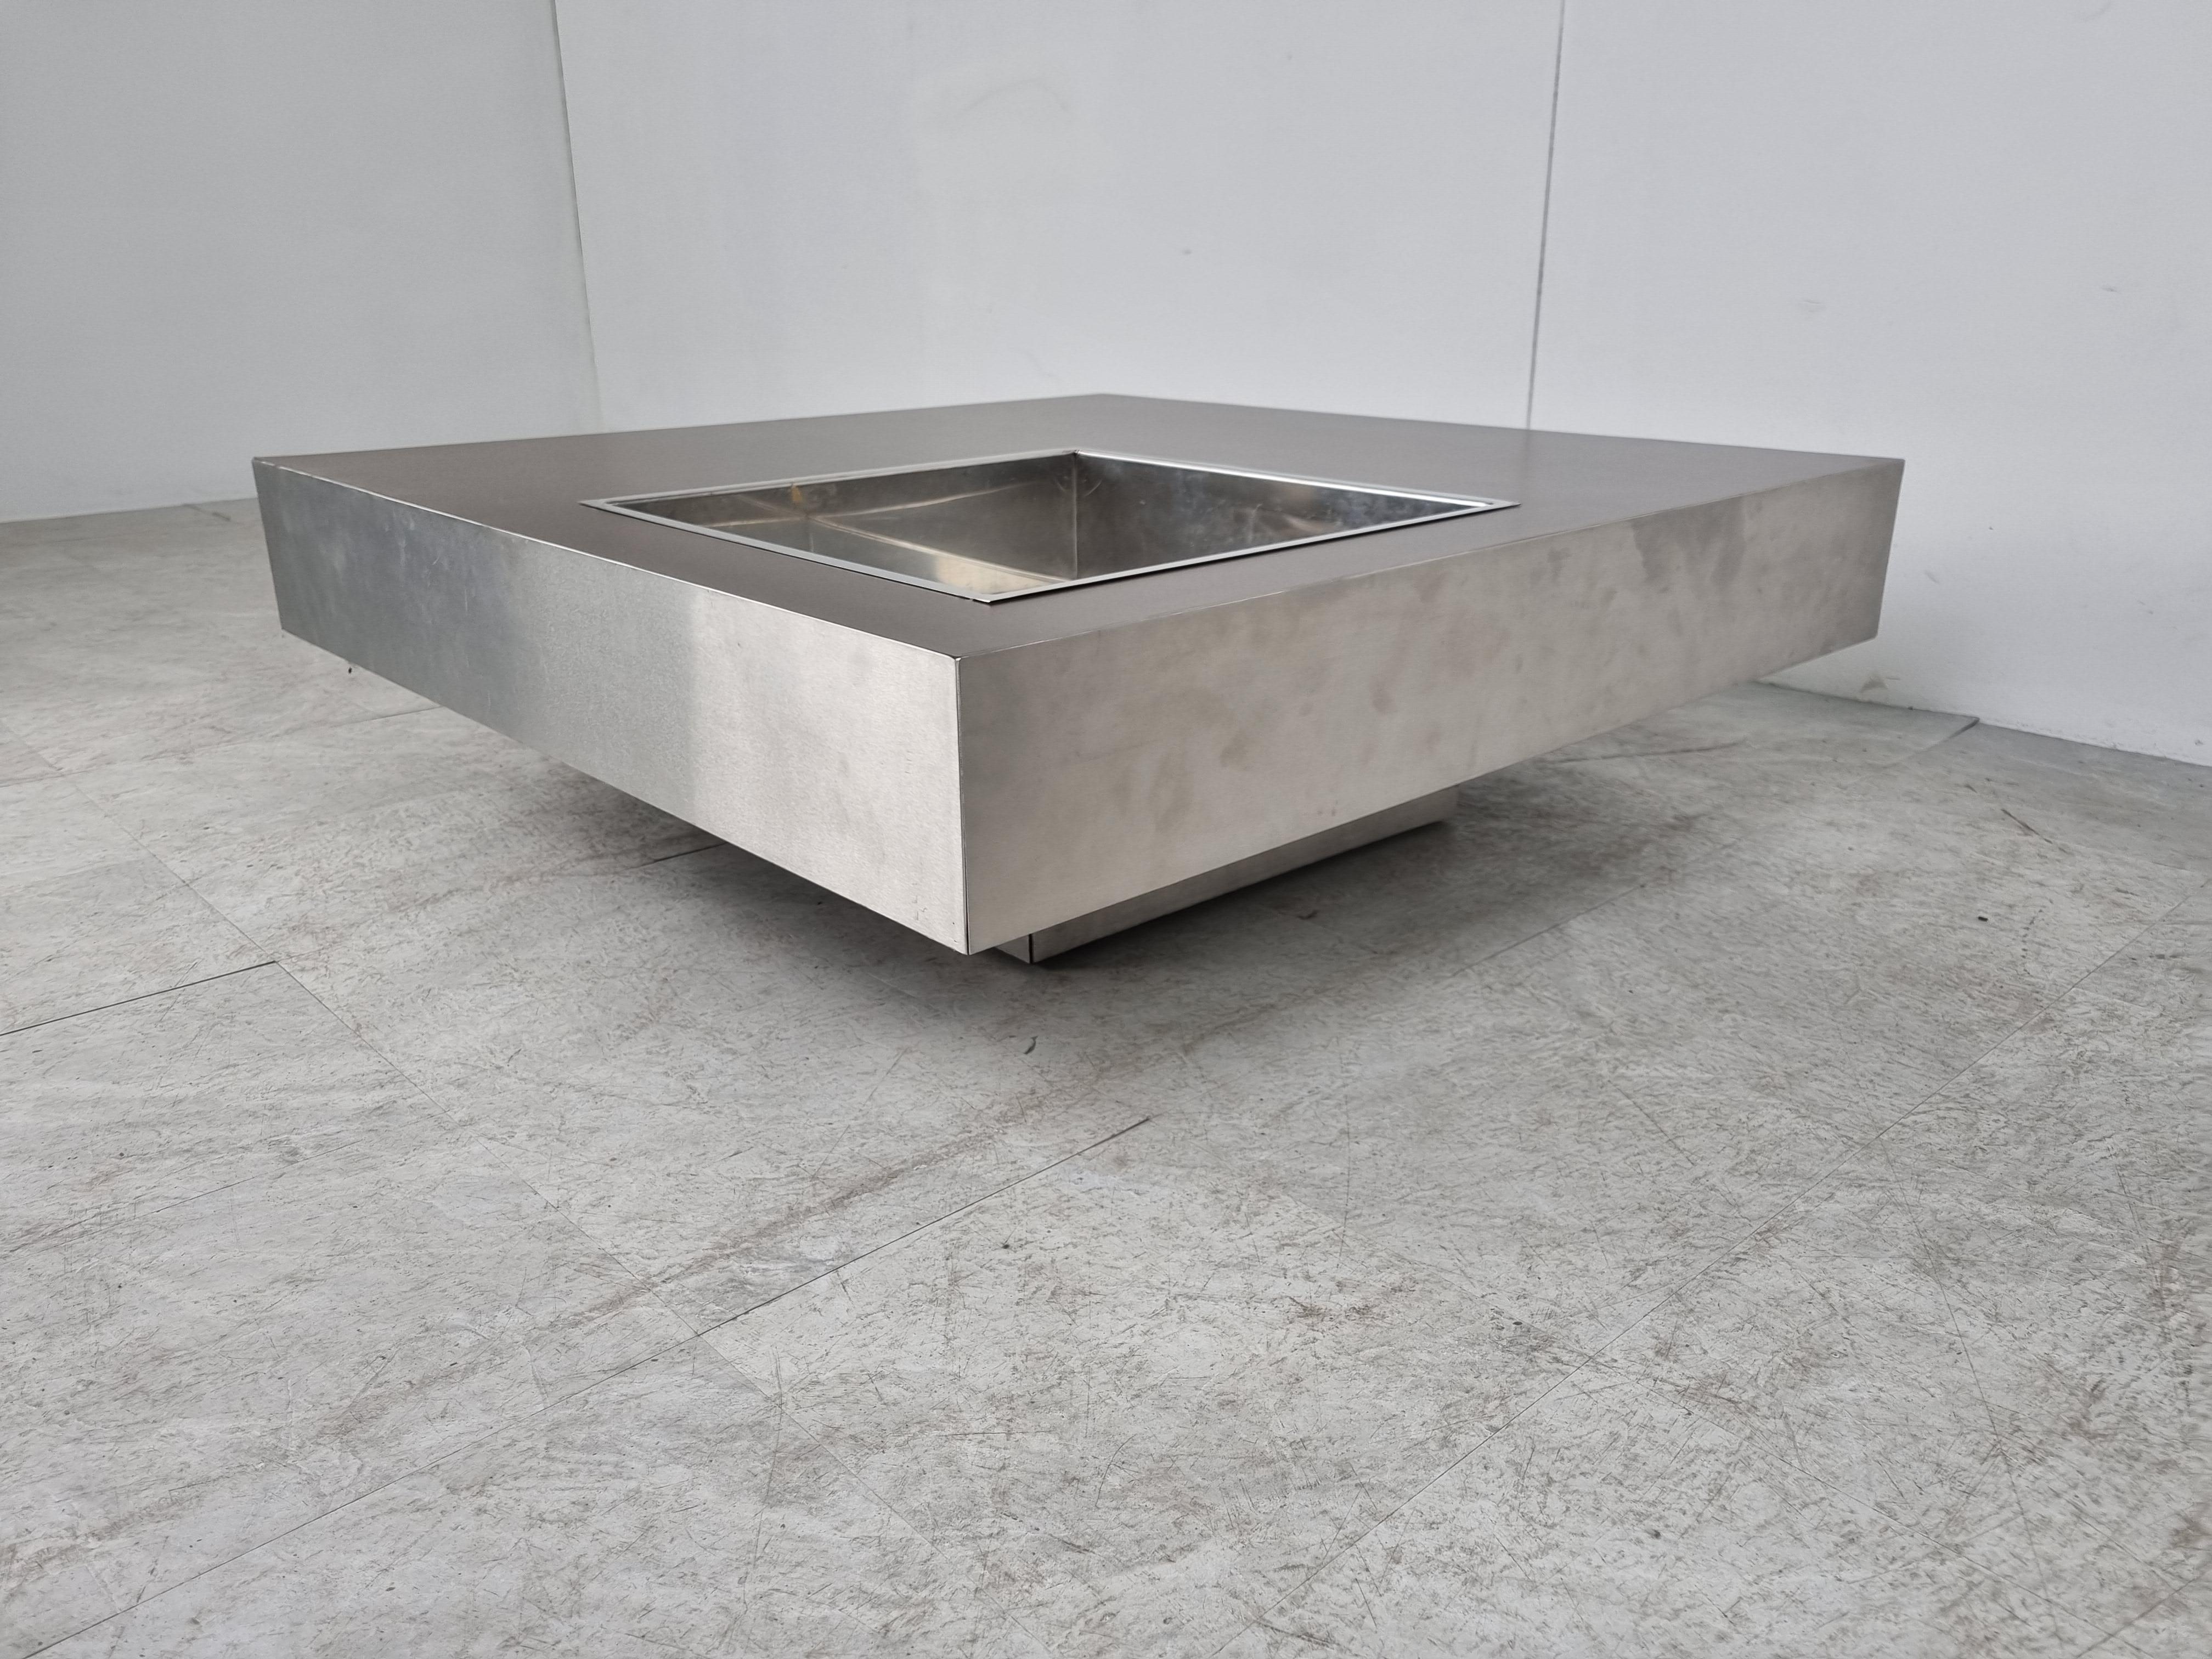 Aluminum Vintage coffee table by Mario Sabot, 1970s